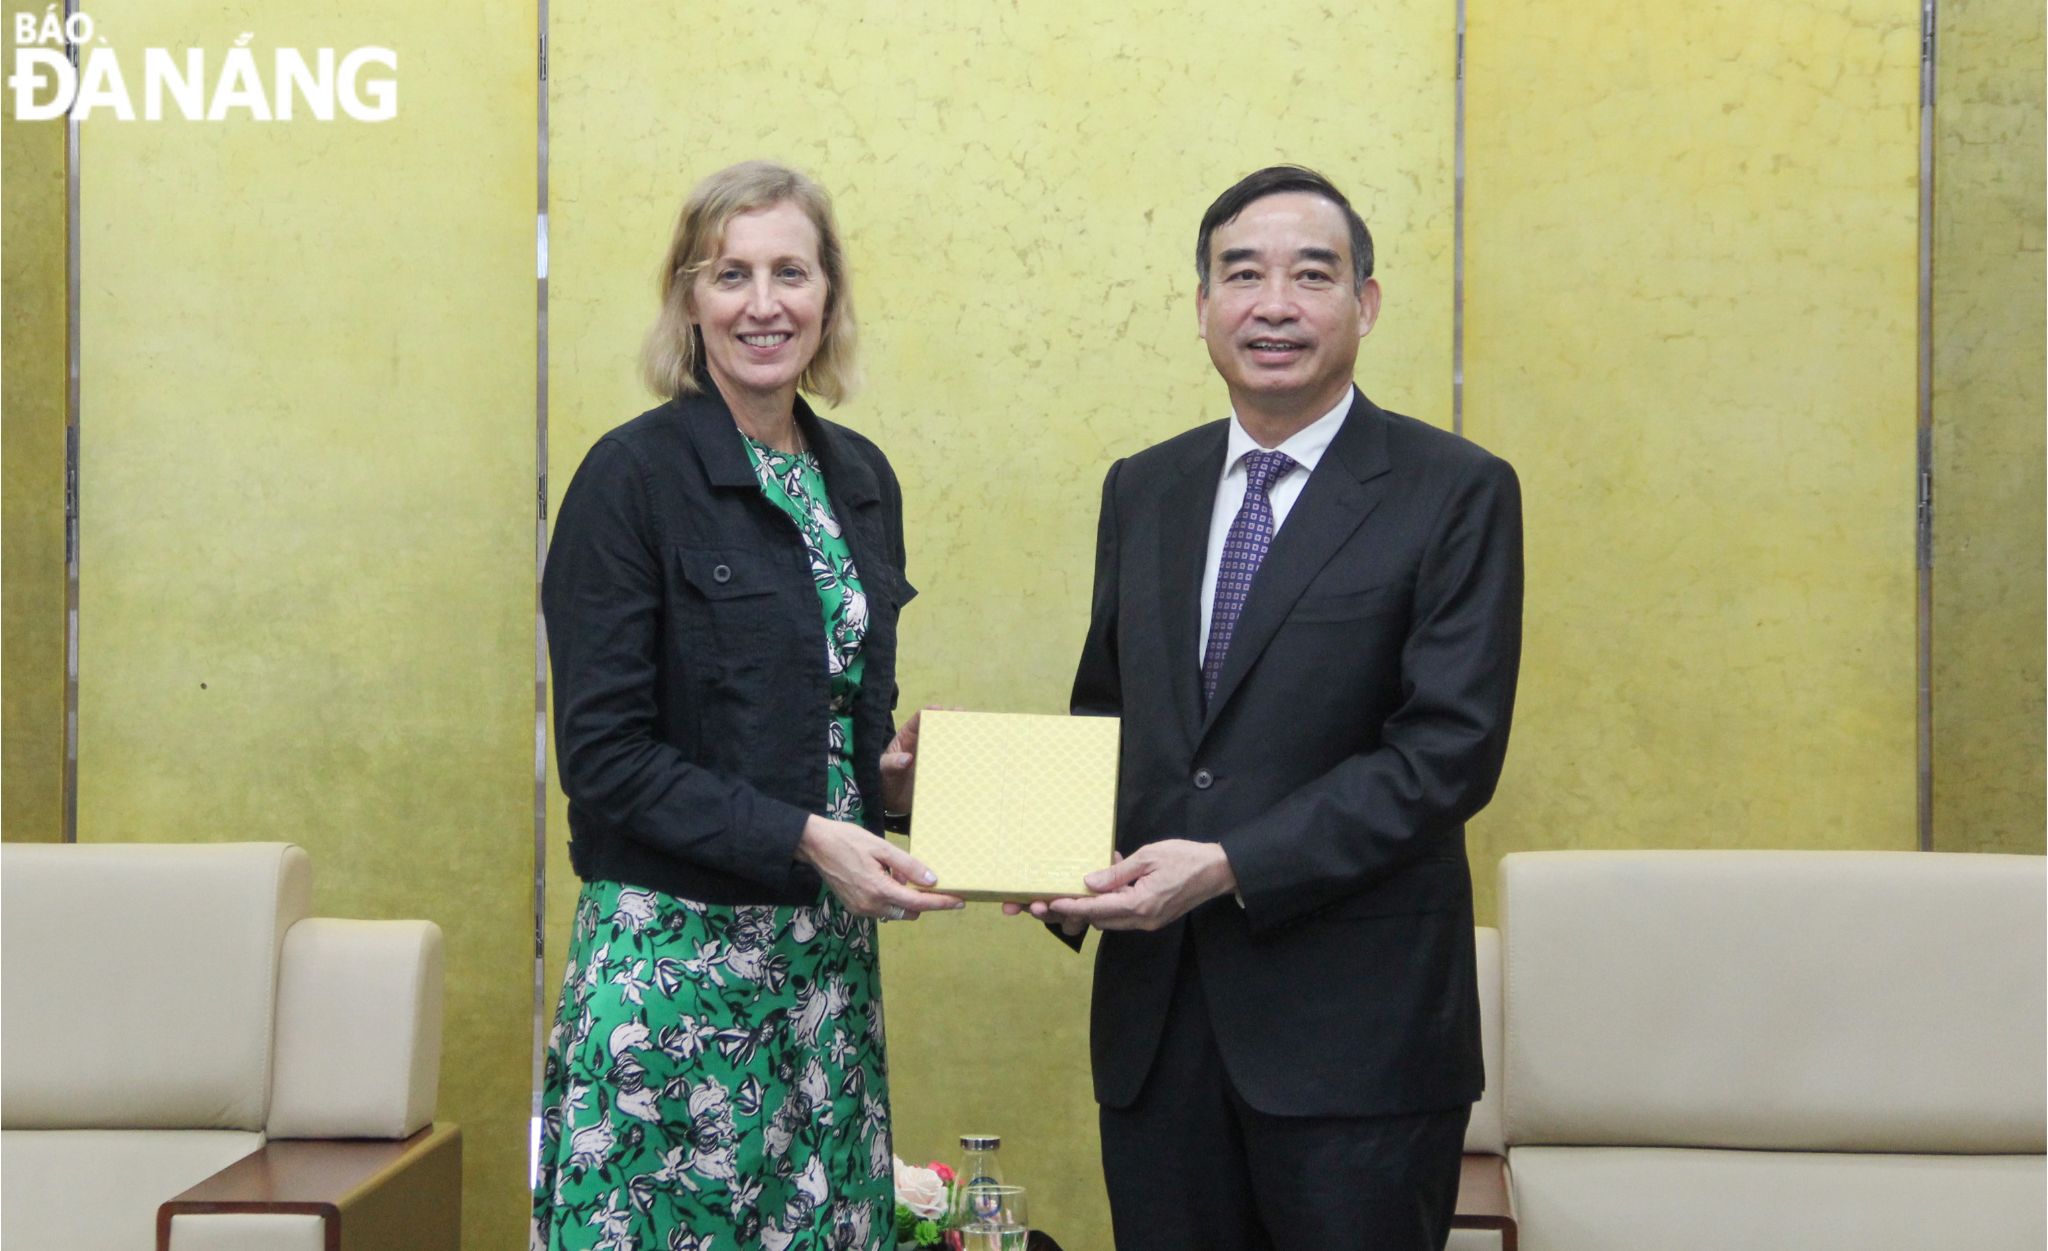 Chairman of the Da Nang People's Committee Le Trung Chinh (right) presents a souvenir to US Consul General in Ho Chi Minh City Susan Burns. Photo: T.PHUONG